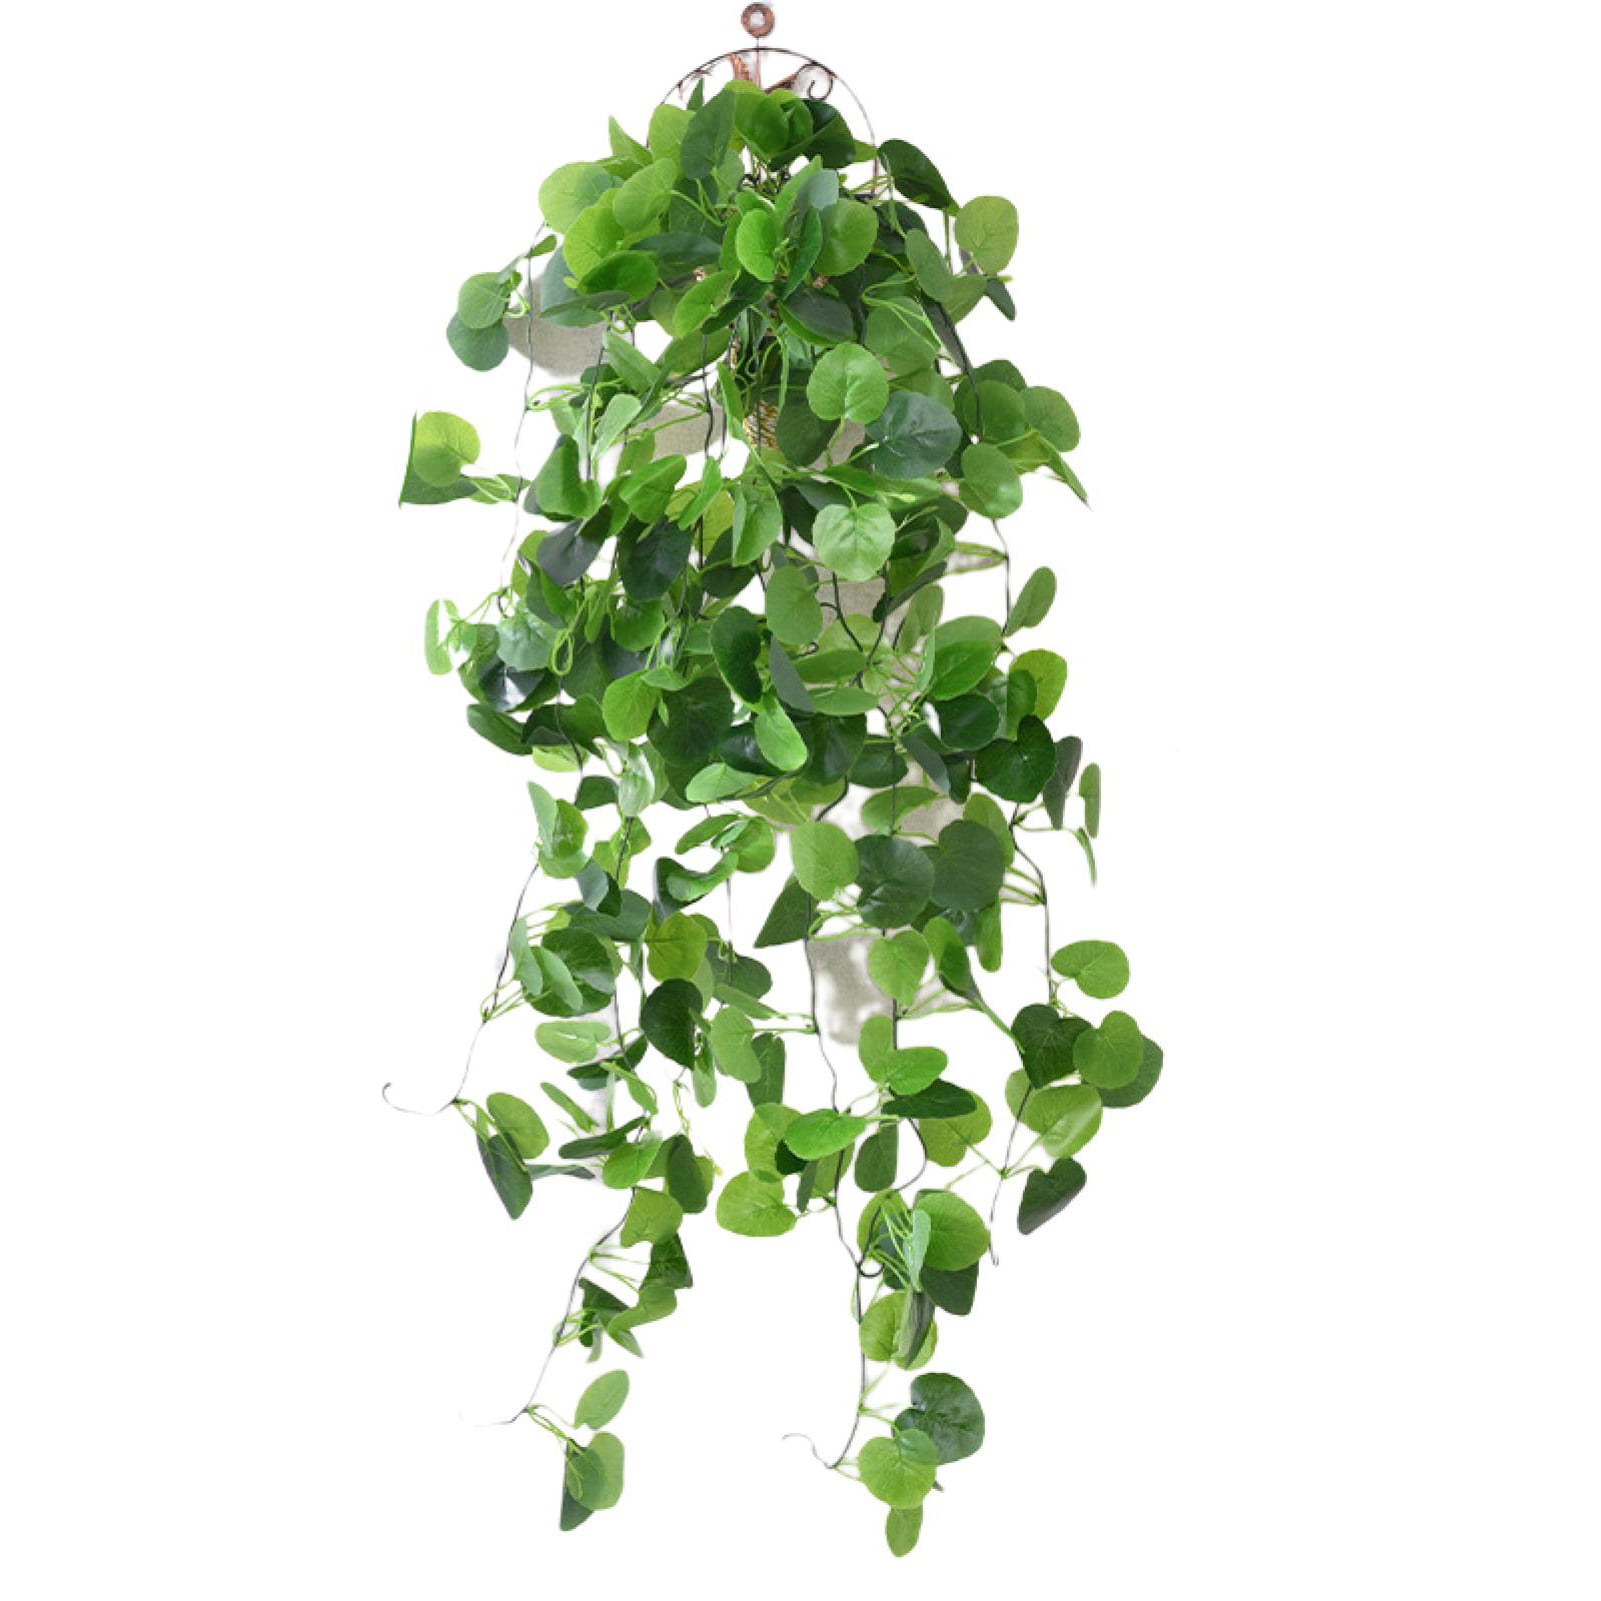 HO2NLE 12 Pack 84 Feet Artificial Fake Hanging Vines Plant Faux